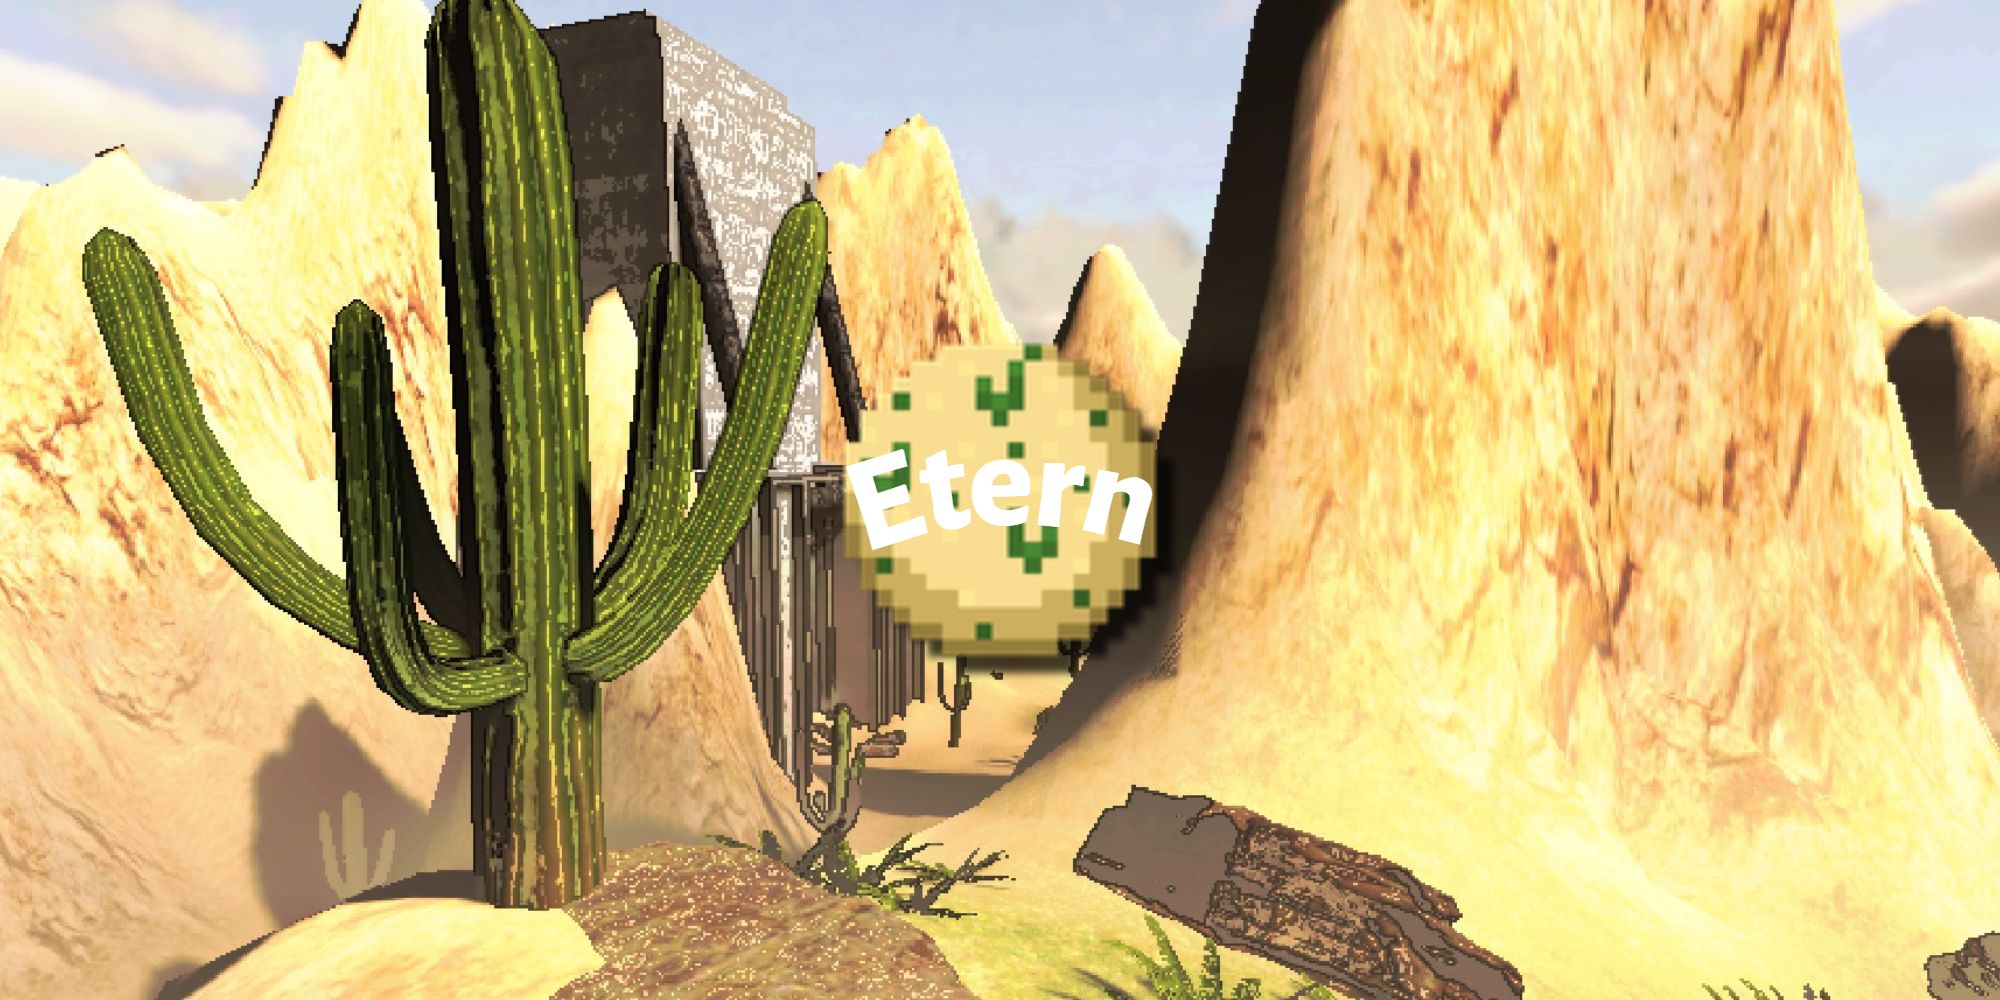 A screenshot from the modded desert moon called Etern which is meant to look like Area 51